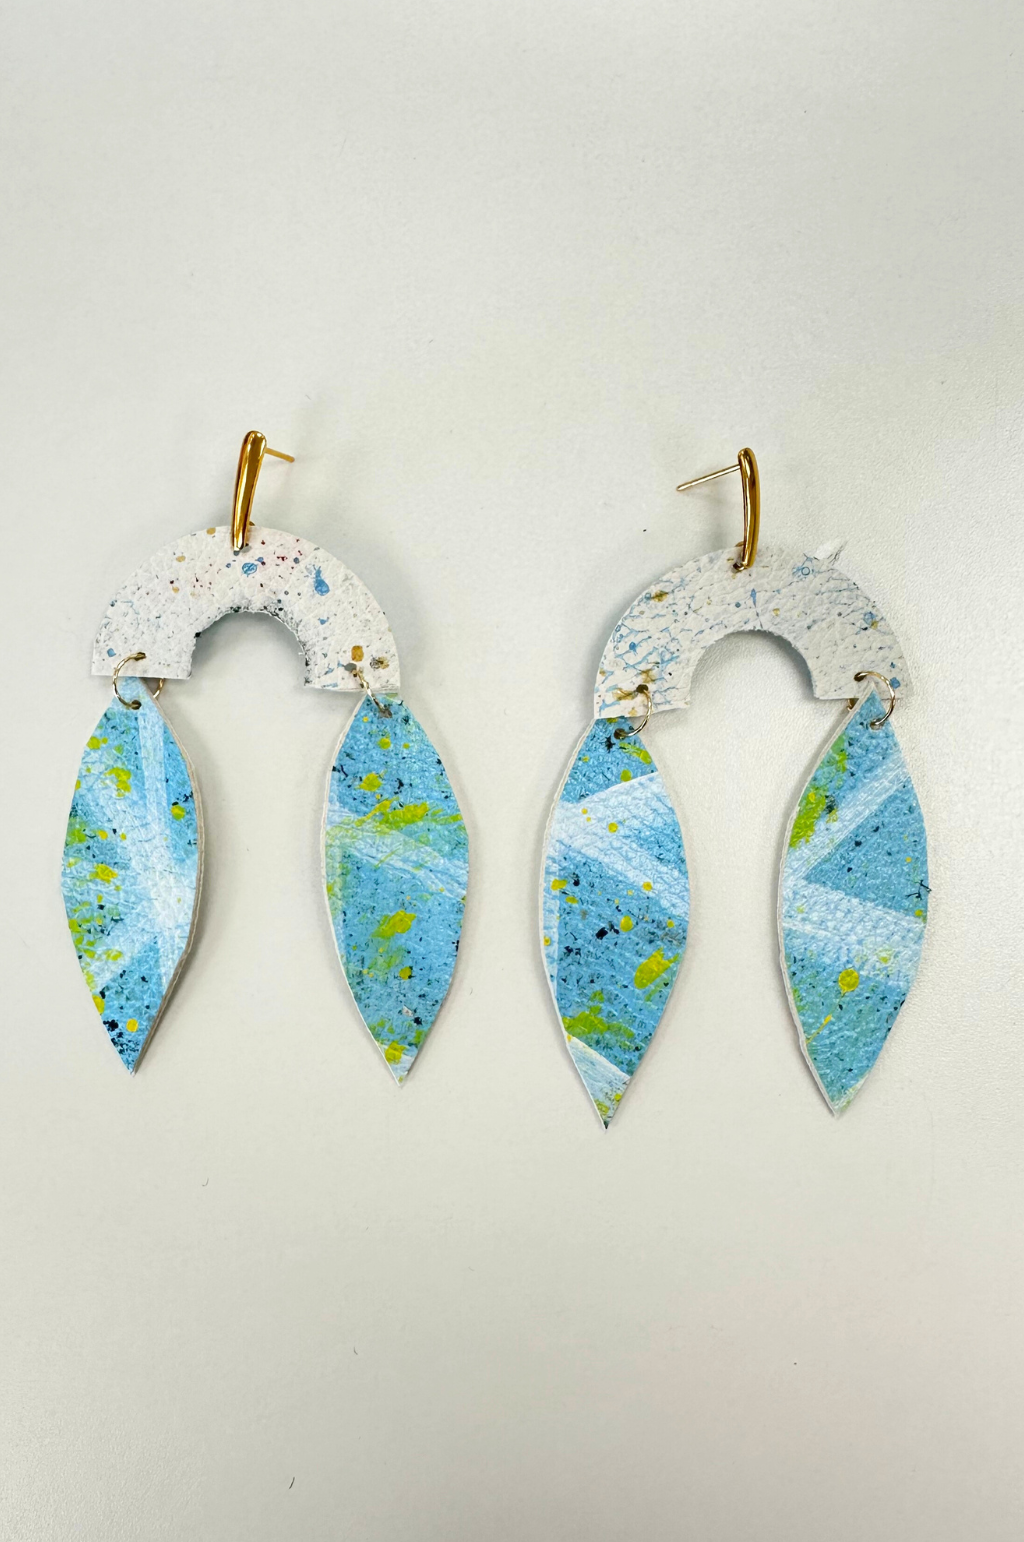 Marley Leather Spirit Earrings by Annie Claire Designs - SoSis